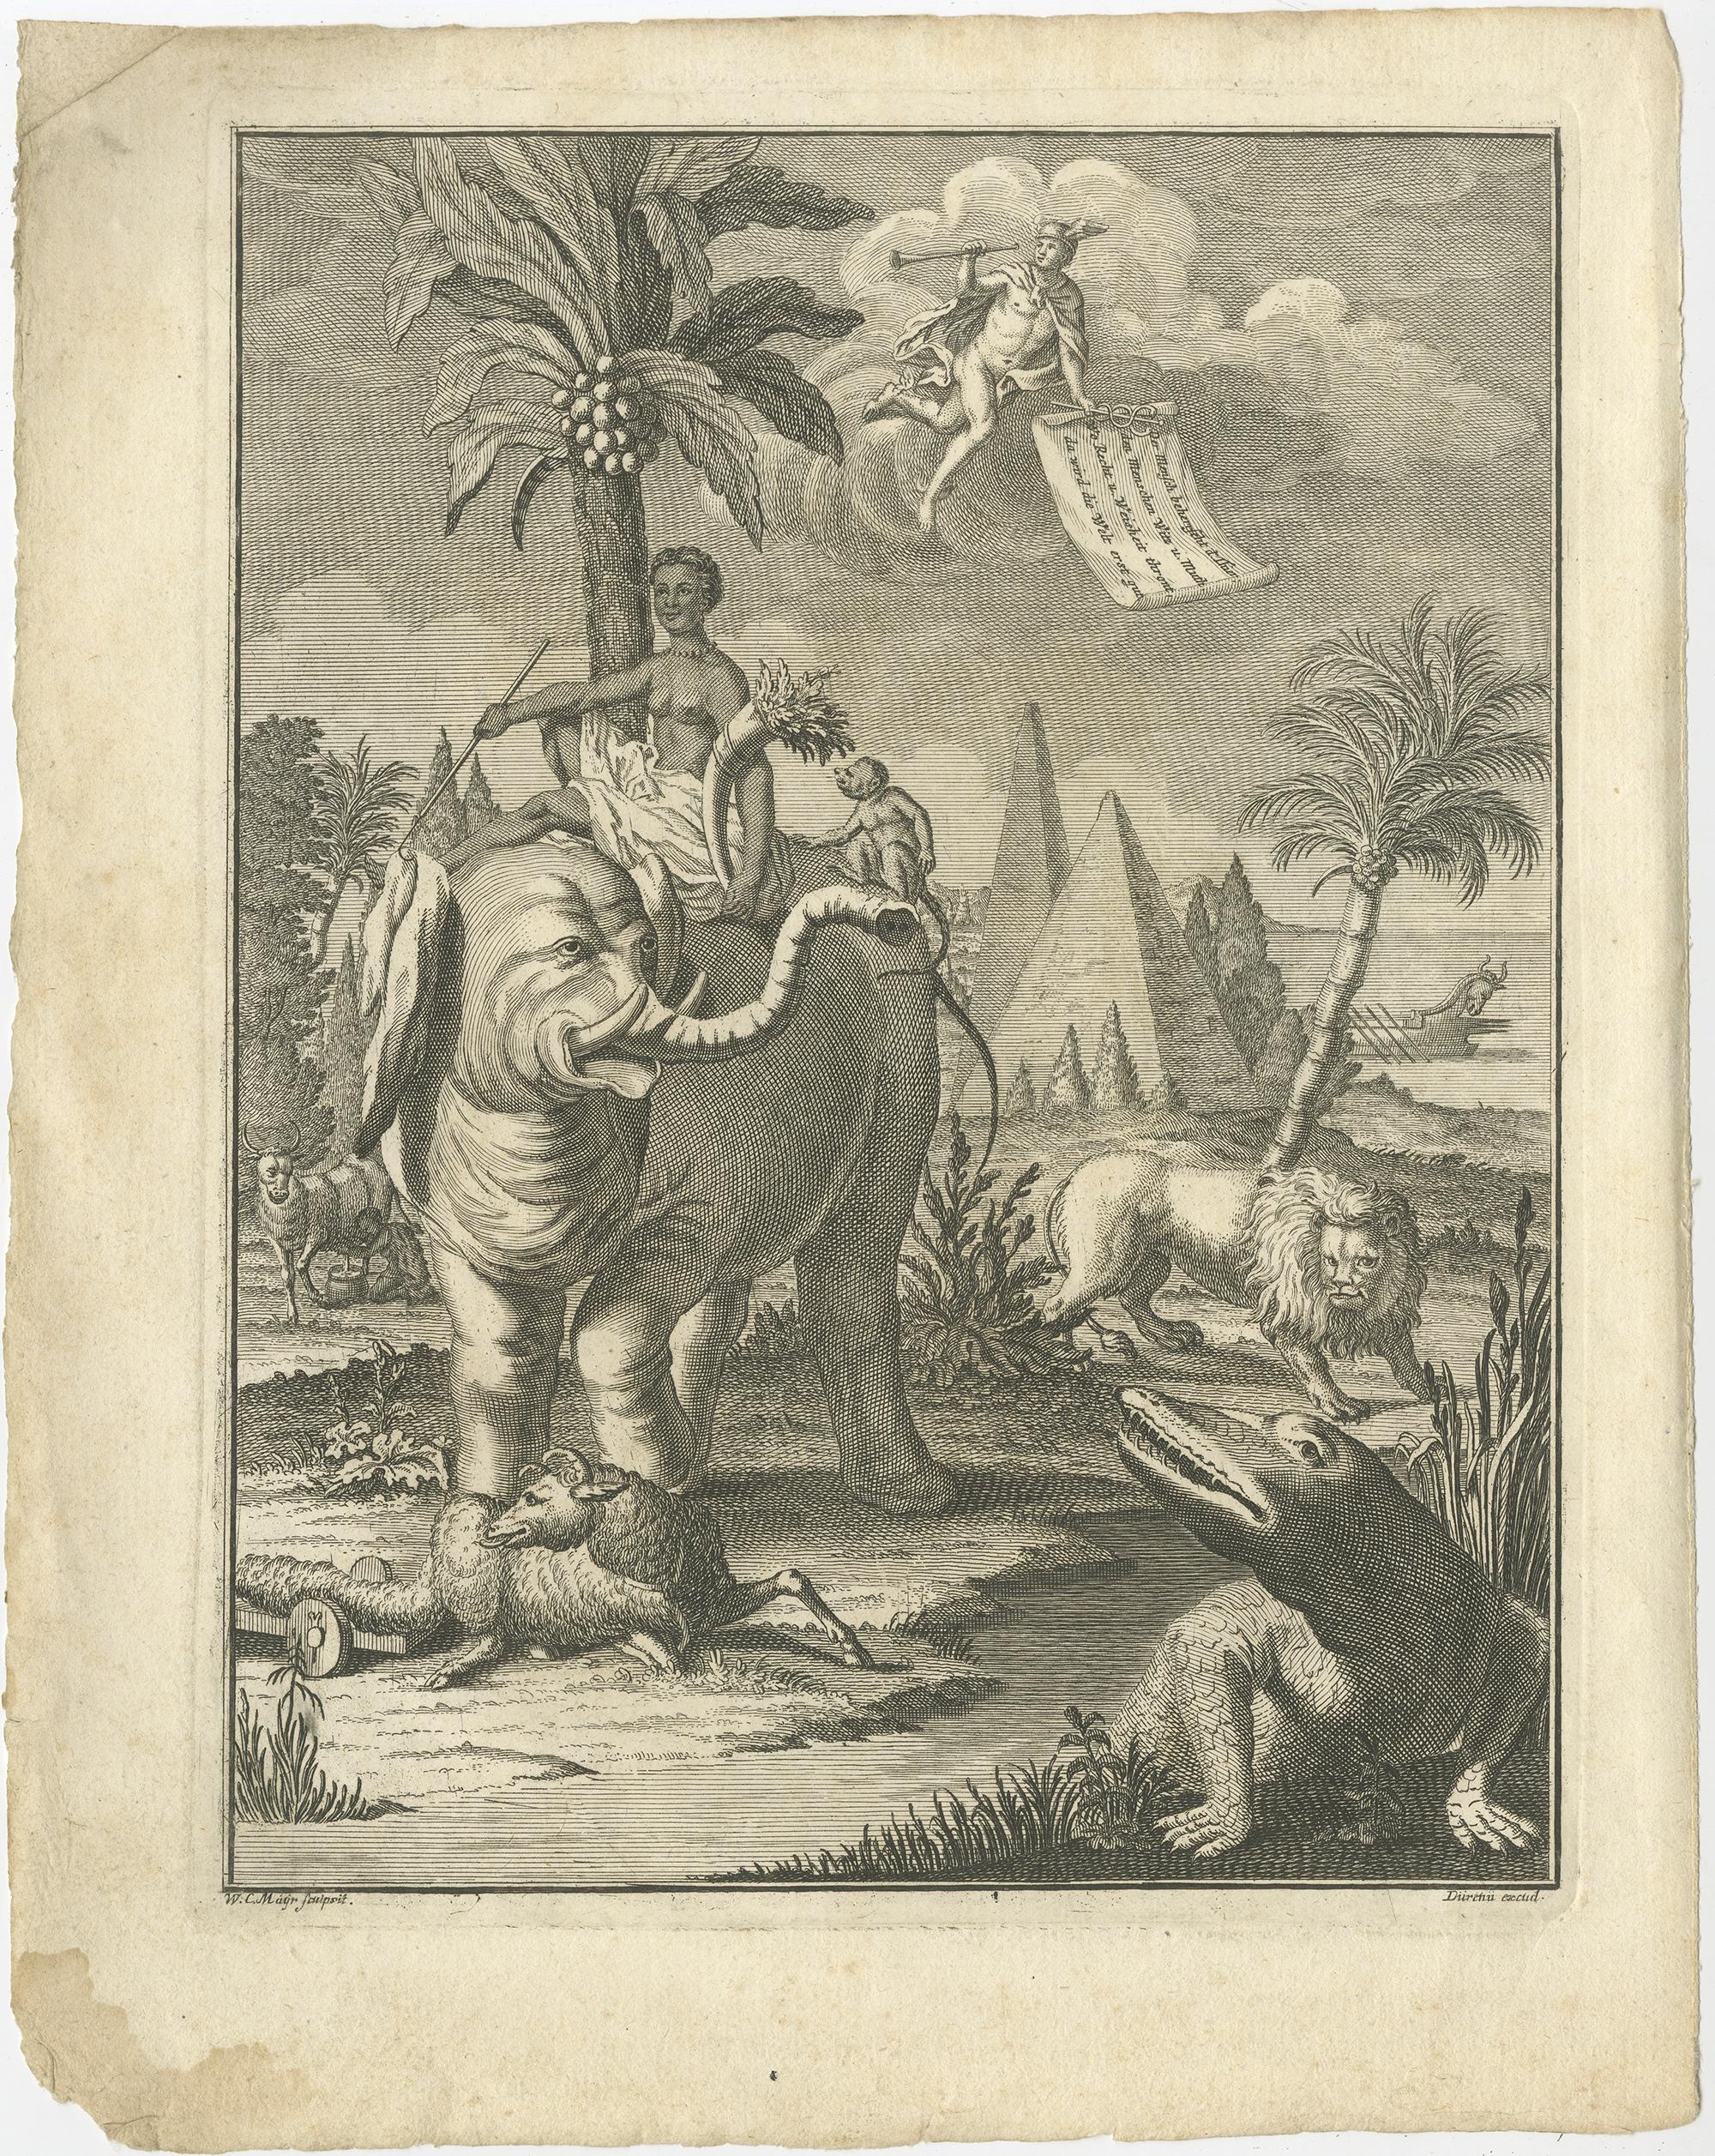 Antique frontispiece with various animals including an elephant, crocodile and lion. This print originates from volume 2 of 'New collection of the strangest travel stories, especially the most trusted news from the countries and peoples of the whole